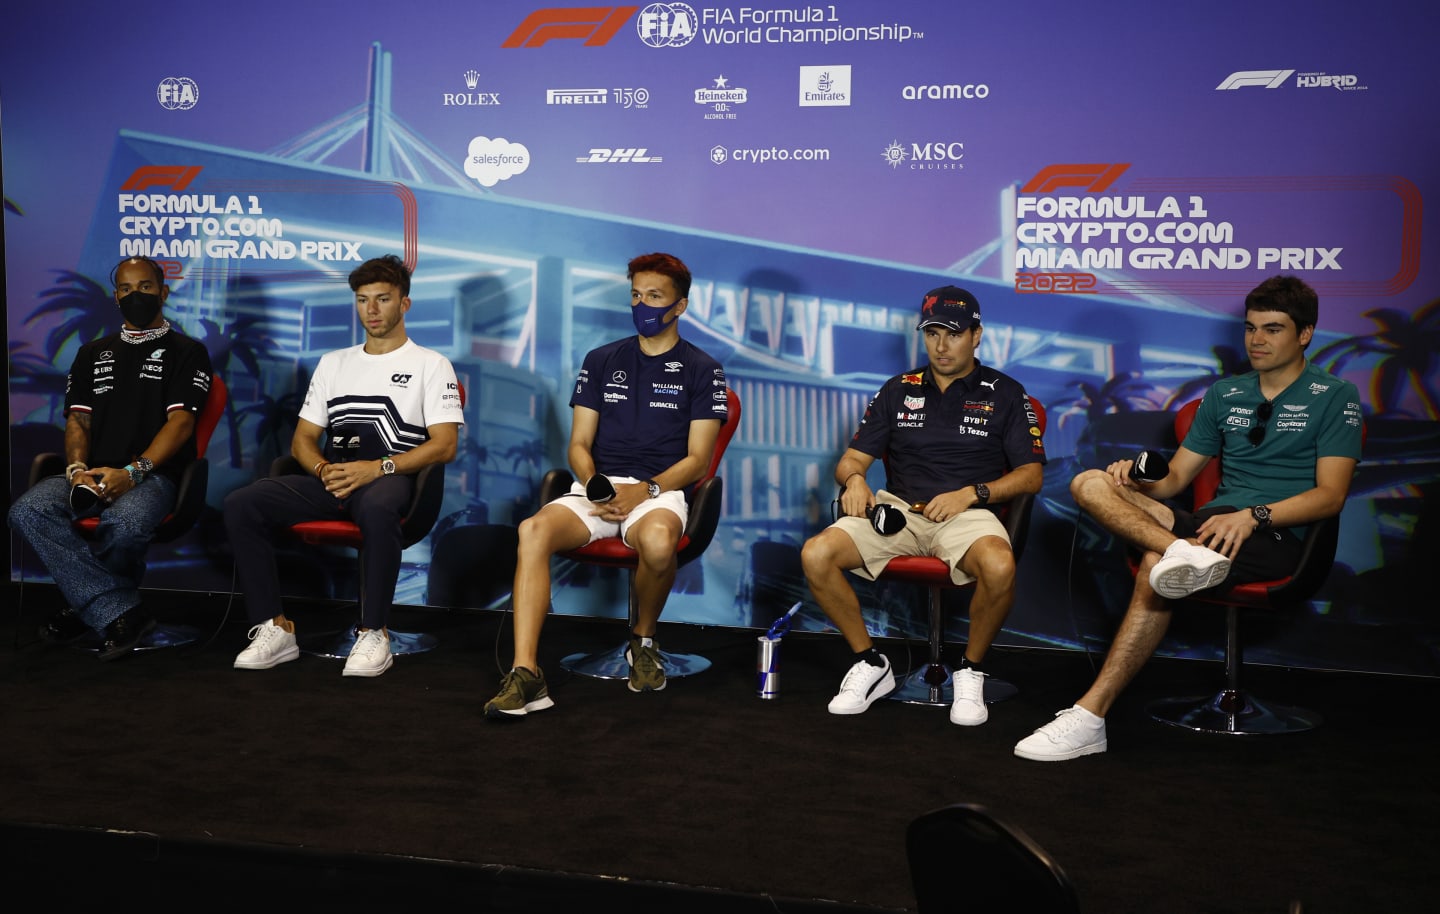 MIAMI, FLORIDA - MAY 06: (L-R) Lewis Hamilton of Great Britain and Mercedes, Pierre Gasly of France and Scuderia AlphaTauri, Alexander Albon of Thailand and Williams, Sergio Perez of Mexico and Oracle Red Bull Racing and Lance Stroll of Canada and Aston Martin F1 Team attend the Drivers Press Conference prior to practice ahead of the F1 Grand Prix of Miami at the Miami International Autodrome on May 06, 2022 in Miami, Florida. (Photo by Jared C. Tilton/Getty Images)